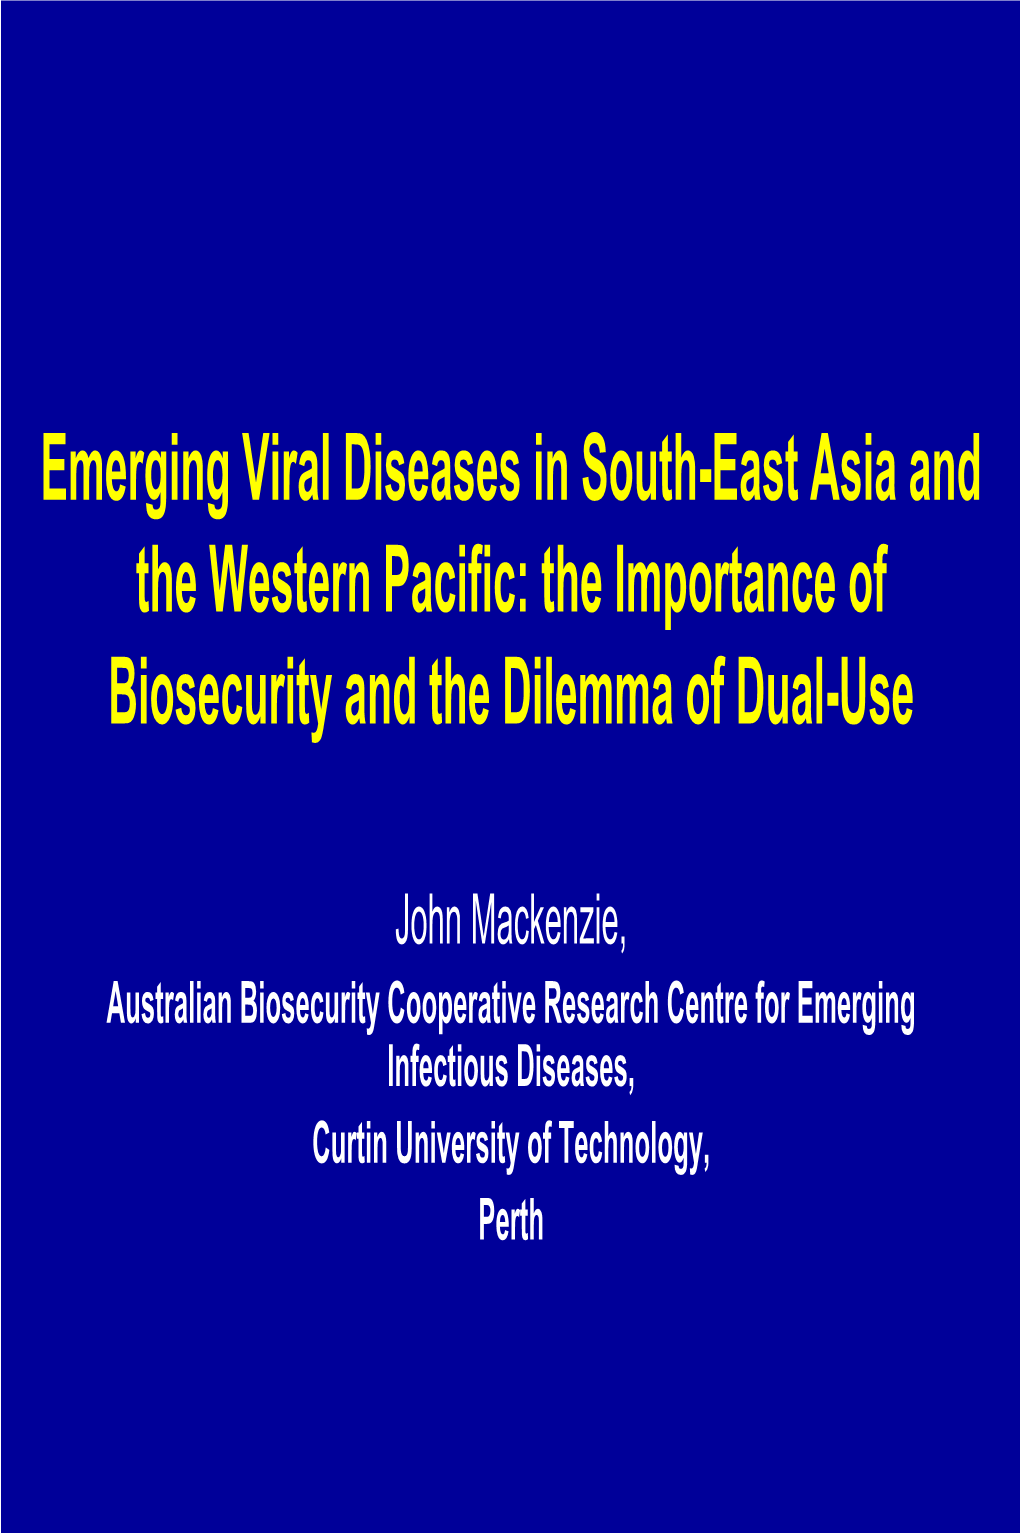 Emerging Viral Diseases in South-East Asia and the Western Pacific: the Importance of Biosecurity and the Dilemma of Dual-Use